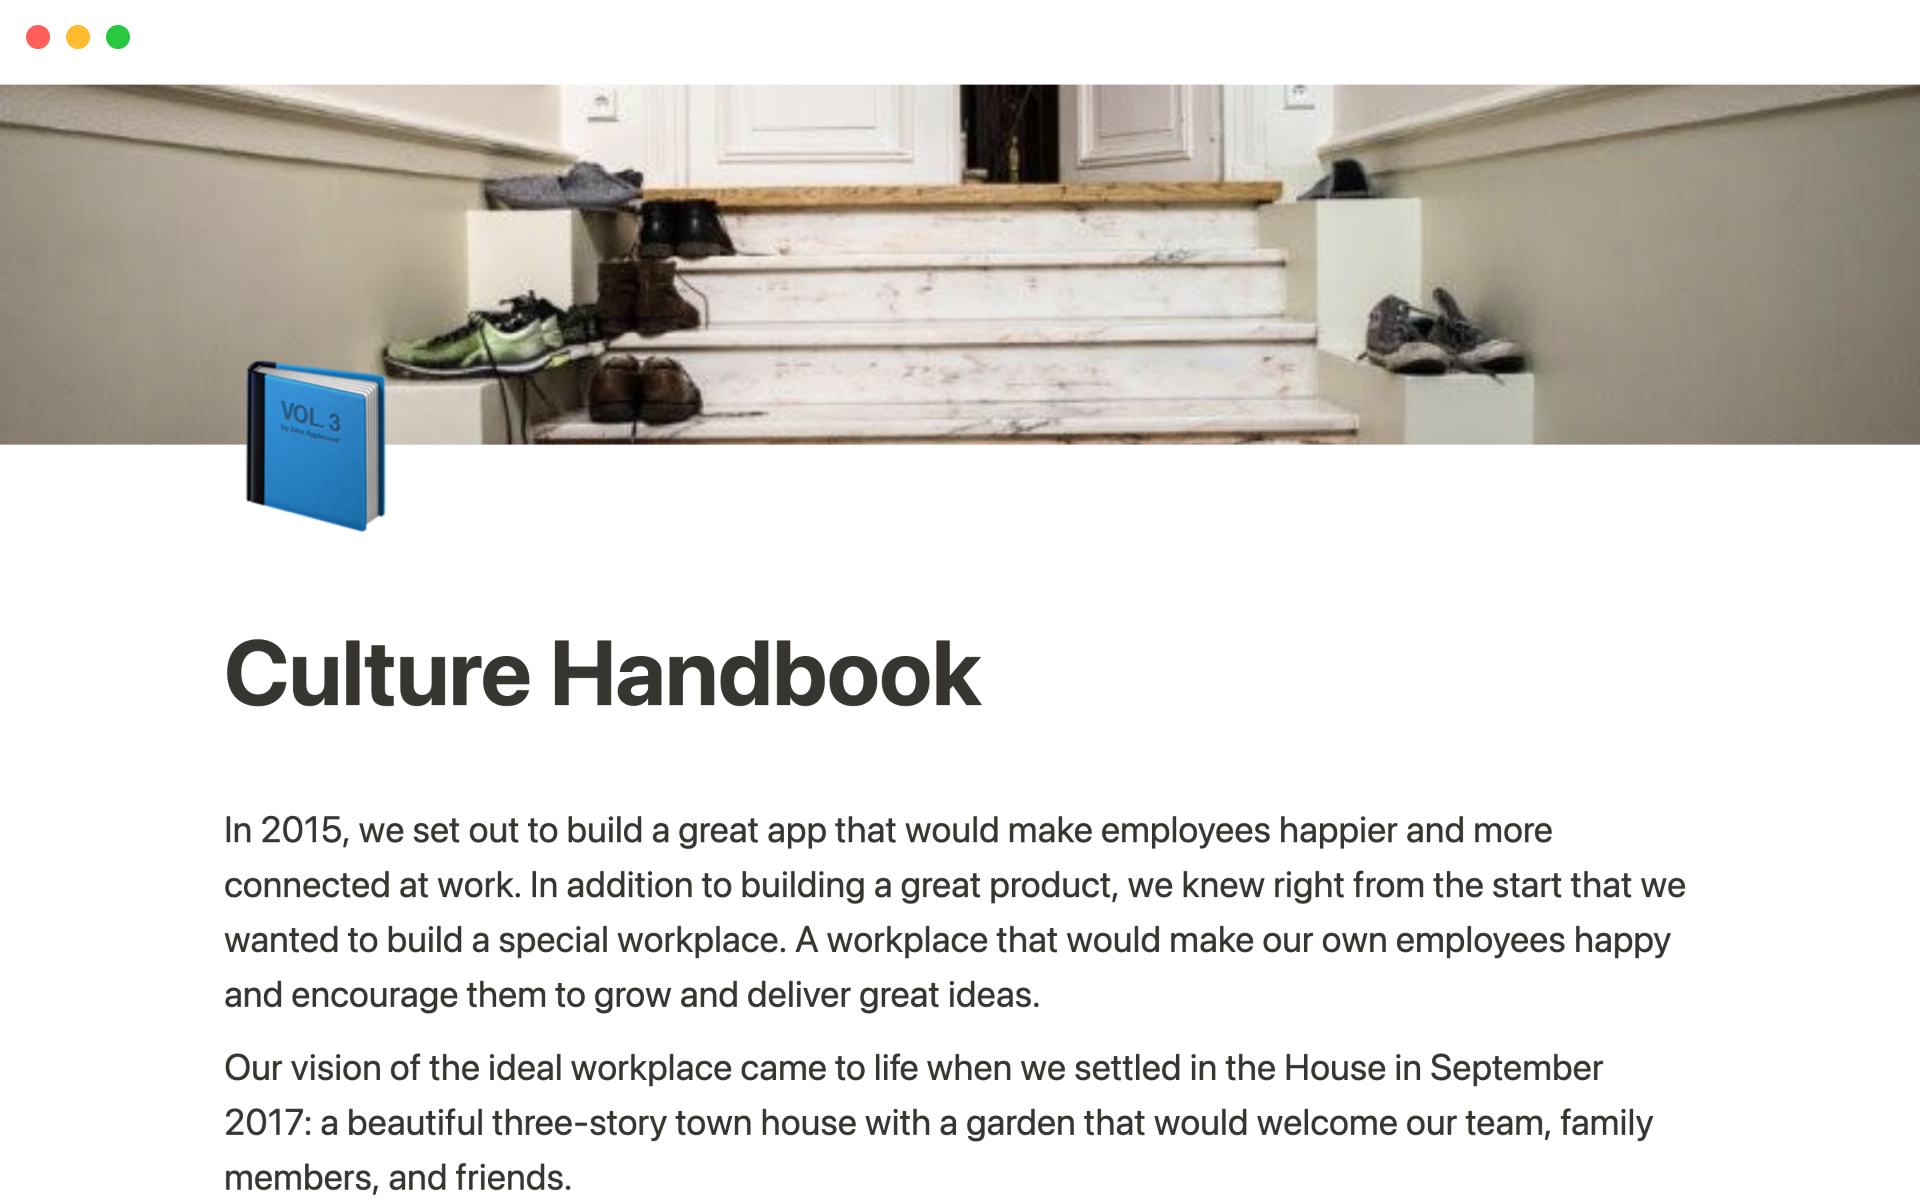 The desktop image for the Culture handbook template